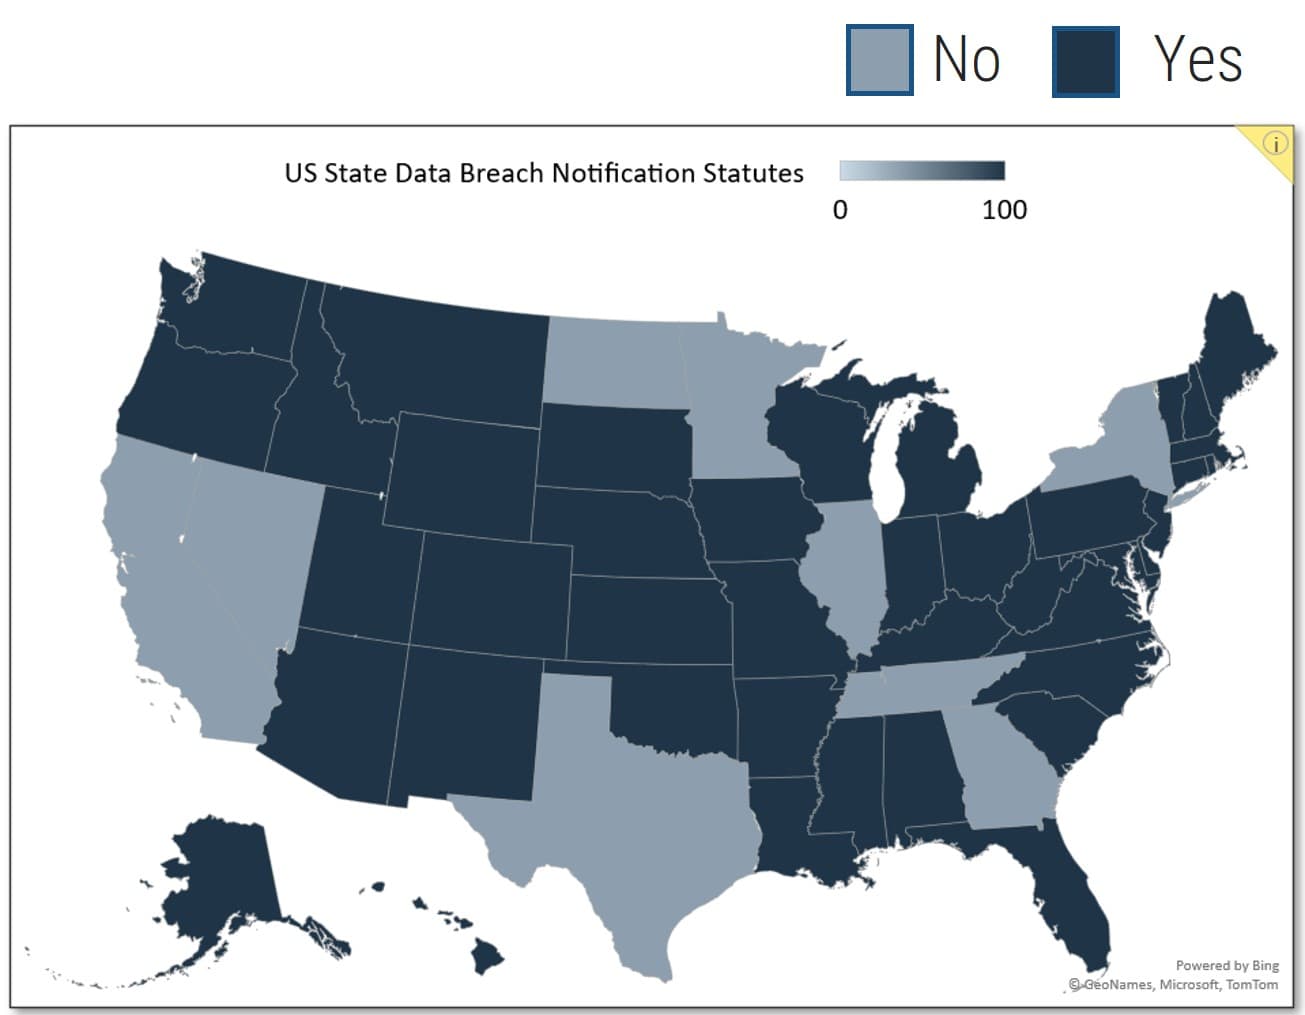 The image contains a graph to show the summary of the US State Data Breach Notification Statutes.